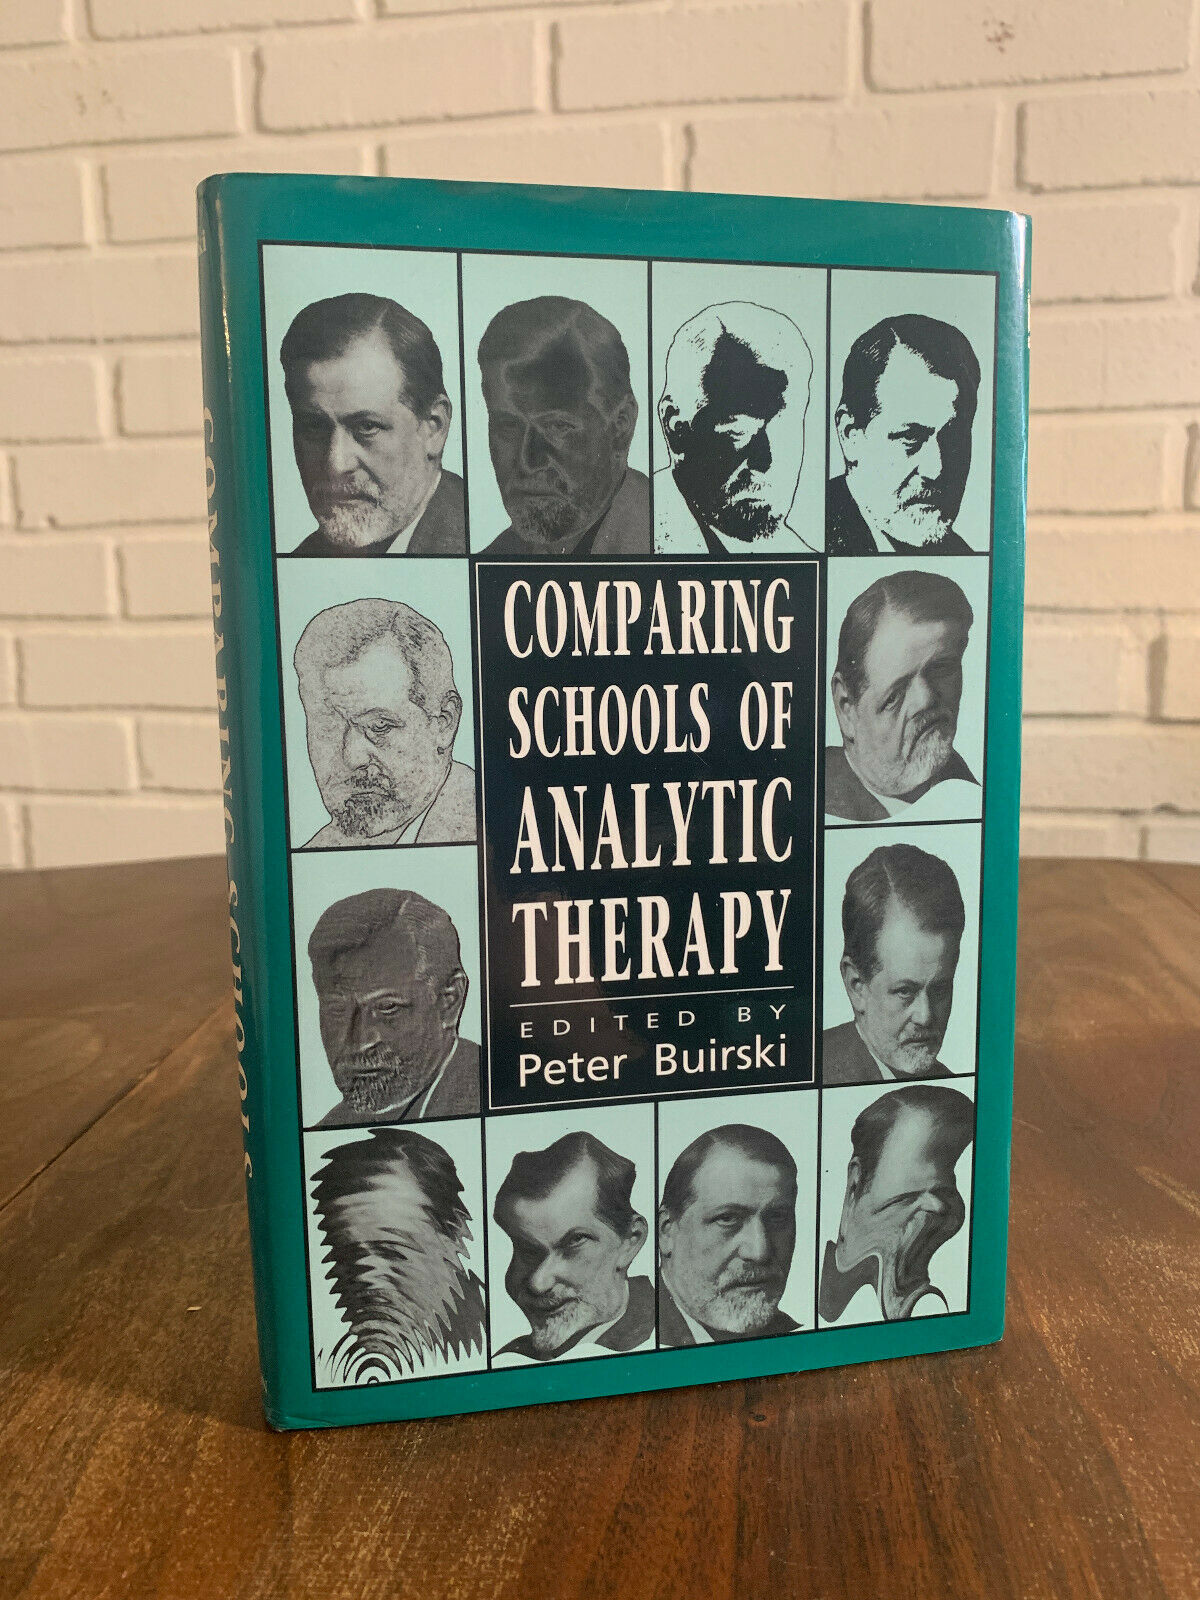 Comparing Schools of Analytic Therapy [Hardcover] Buirski, Peter (Z2)